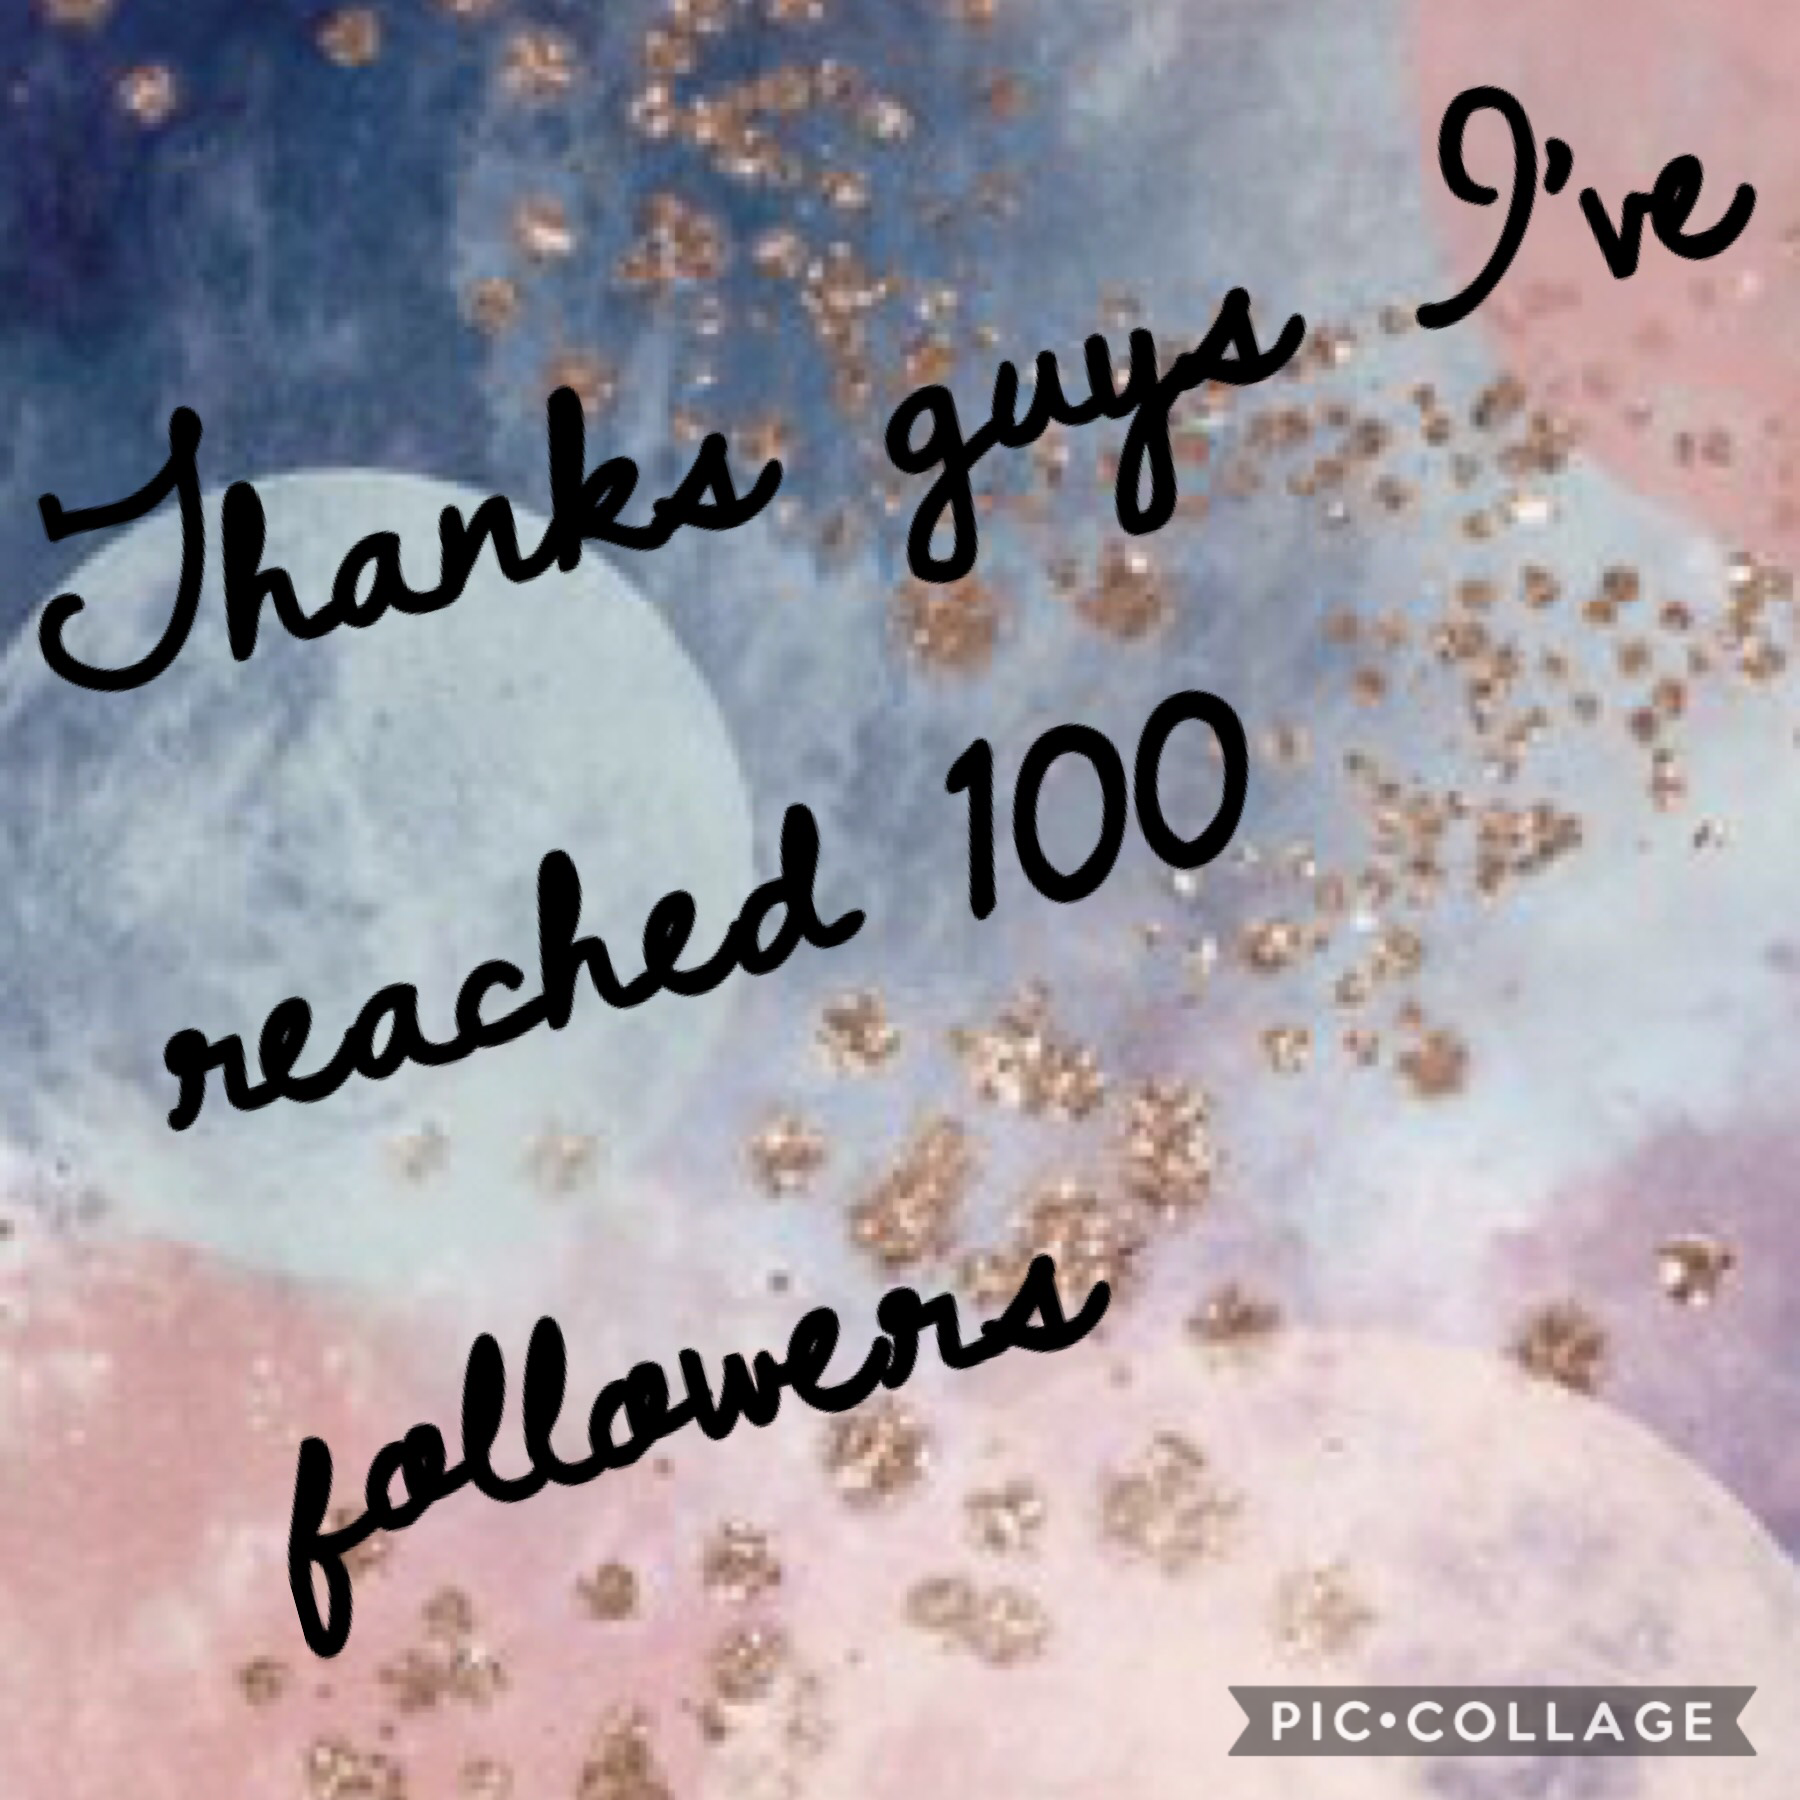 I’ve reached a 100 followers thanks guys 😺